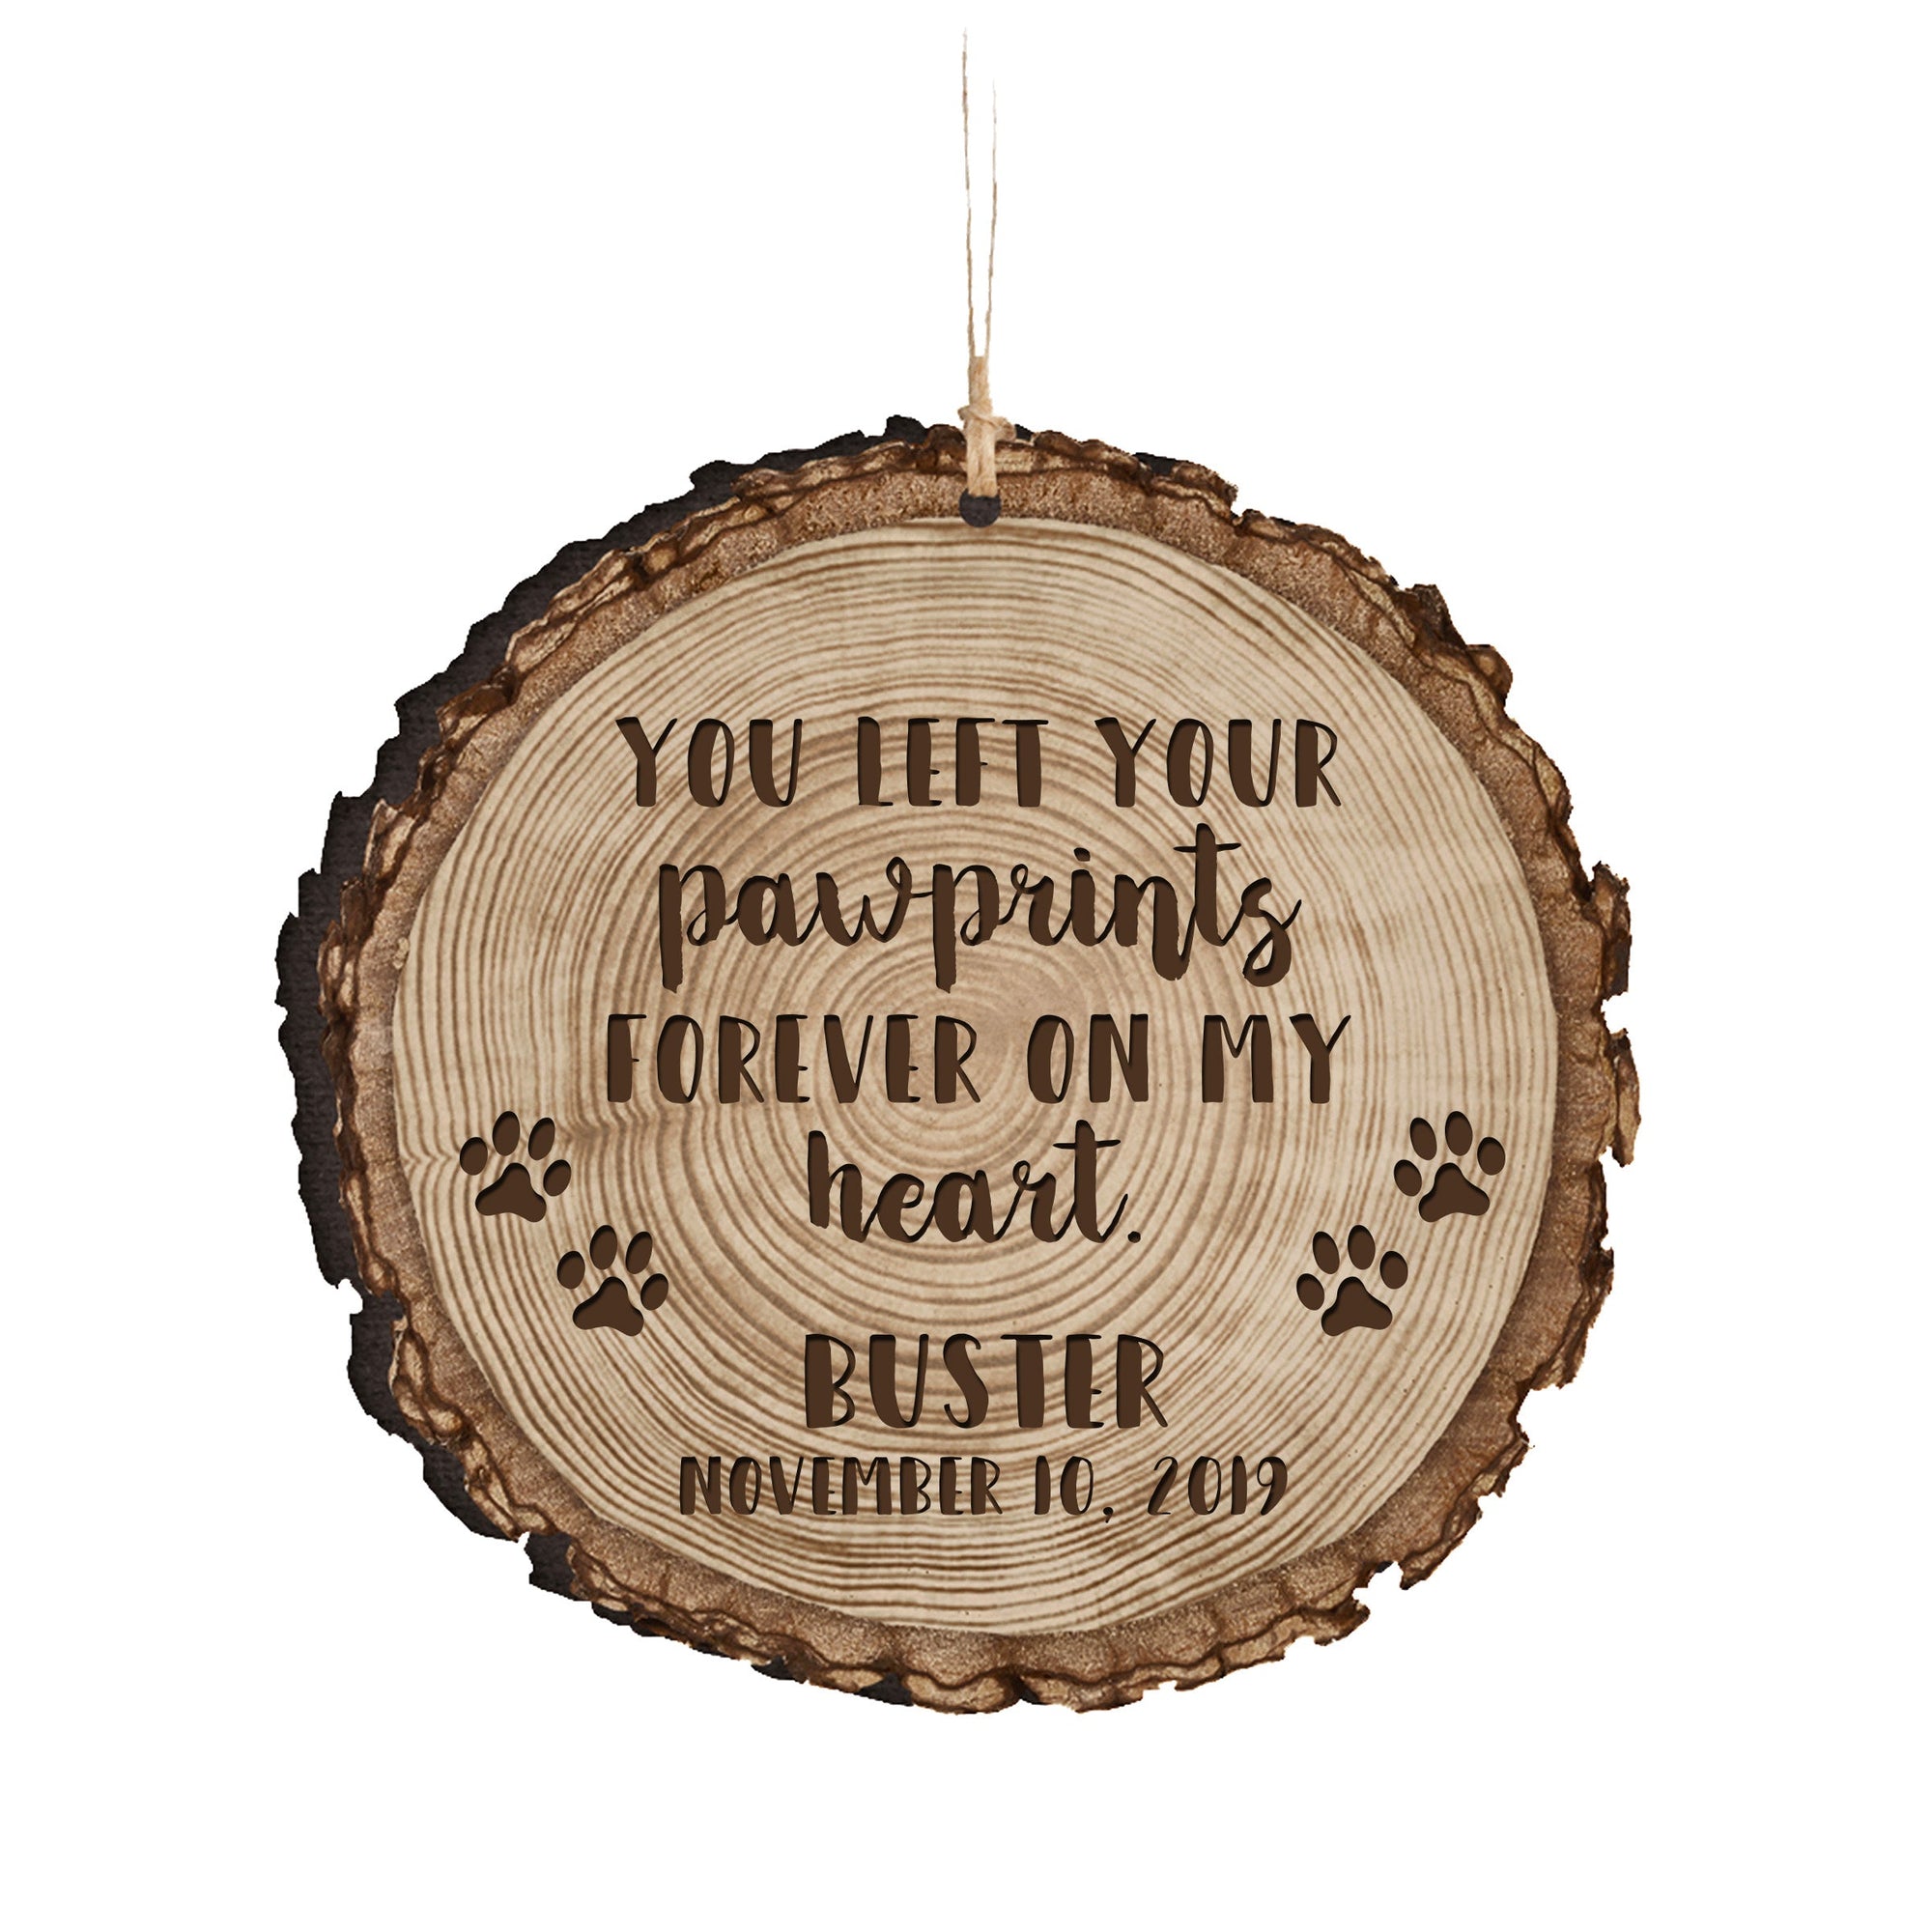 Pet Memorial Wooden Tree Slice Ornament - You Left Your Paw Prints